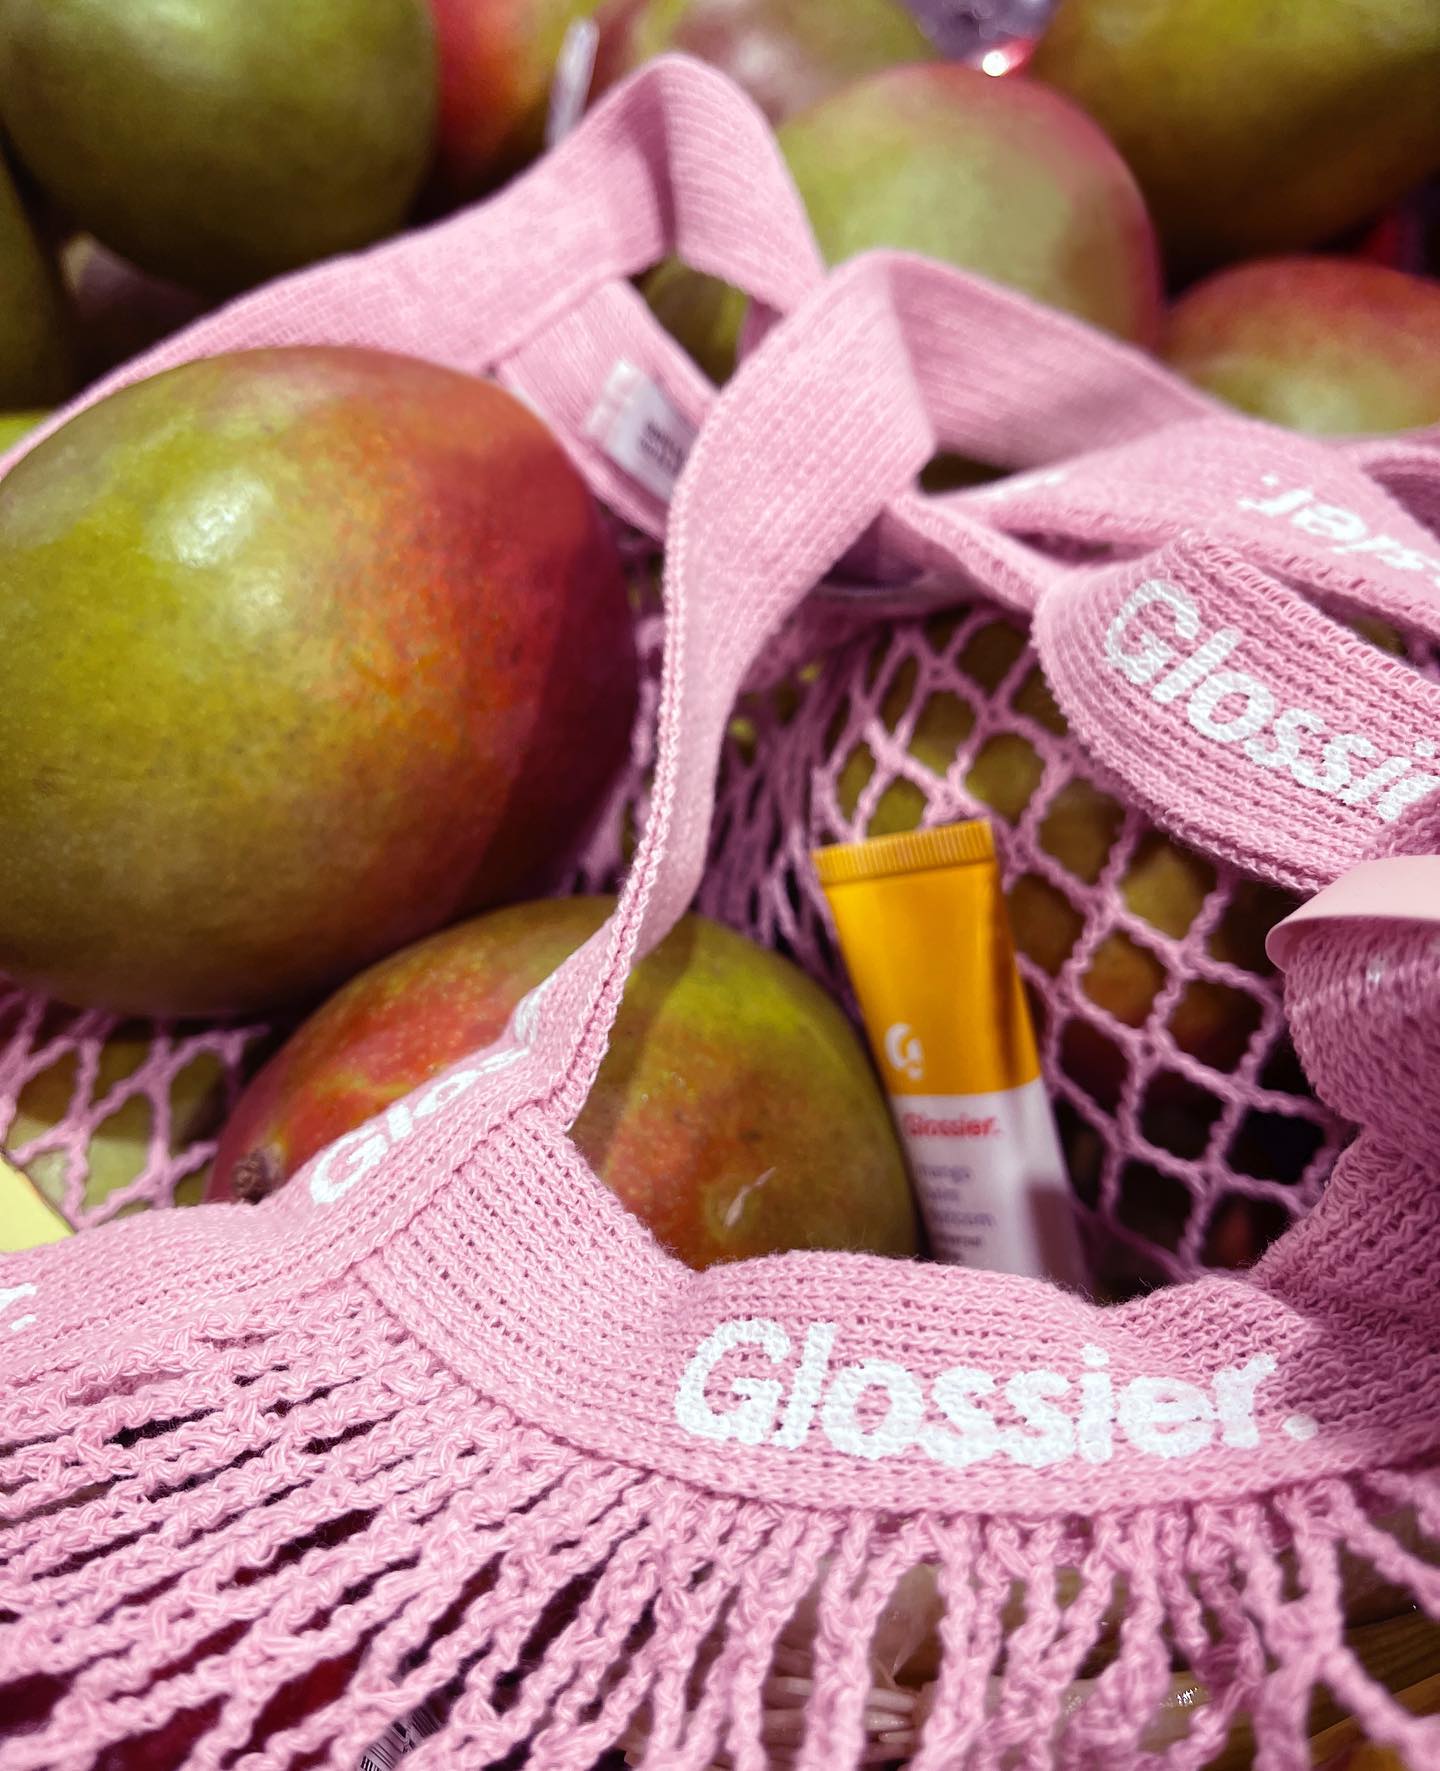 Mangos and Glossier lip products are laid within a light pink Glossier fruit bag.